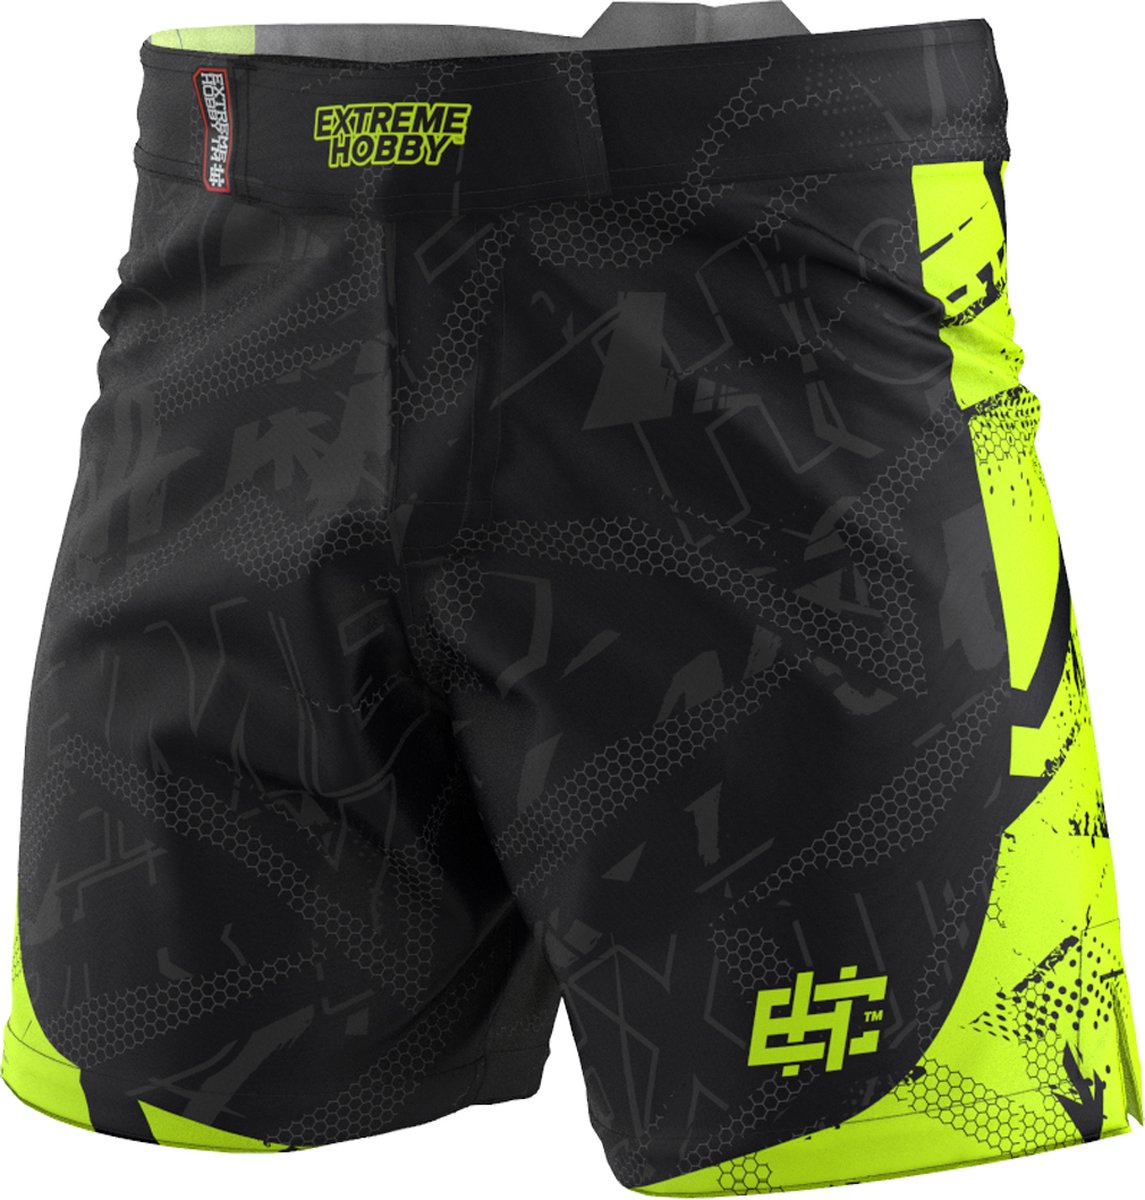 Extreme Hobby - Grappling Shorts - MMA vechtshorts - Fight Shorts - Neo Lime - Zwart, Lime - Maat L